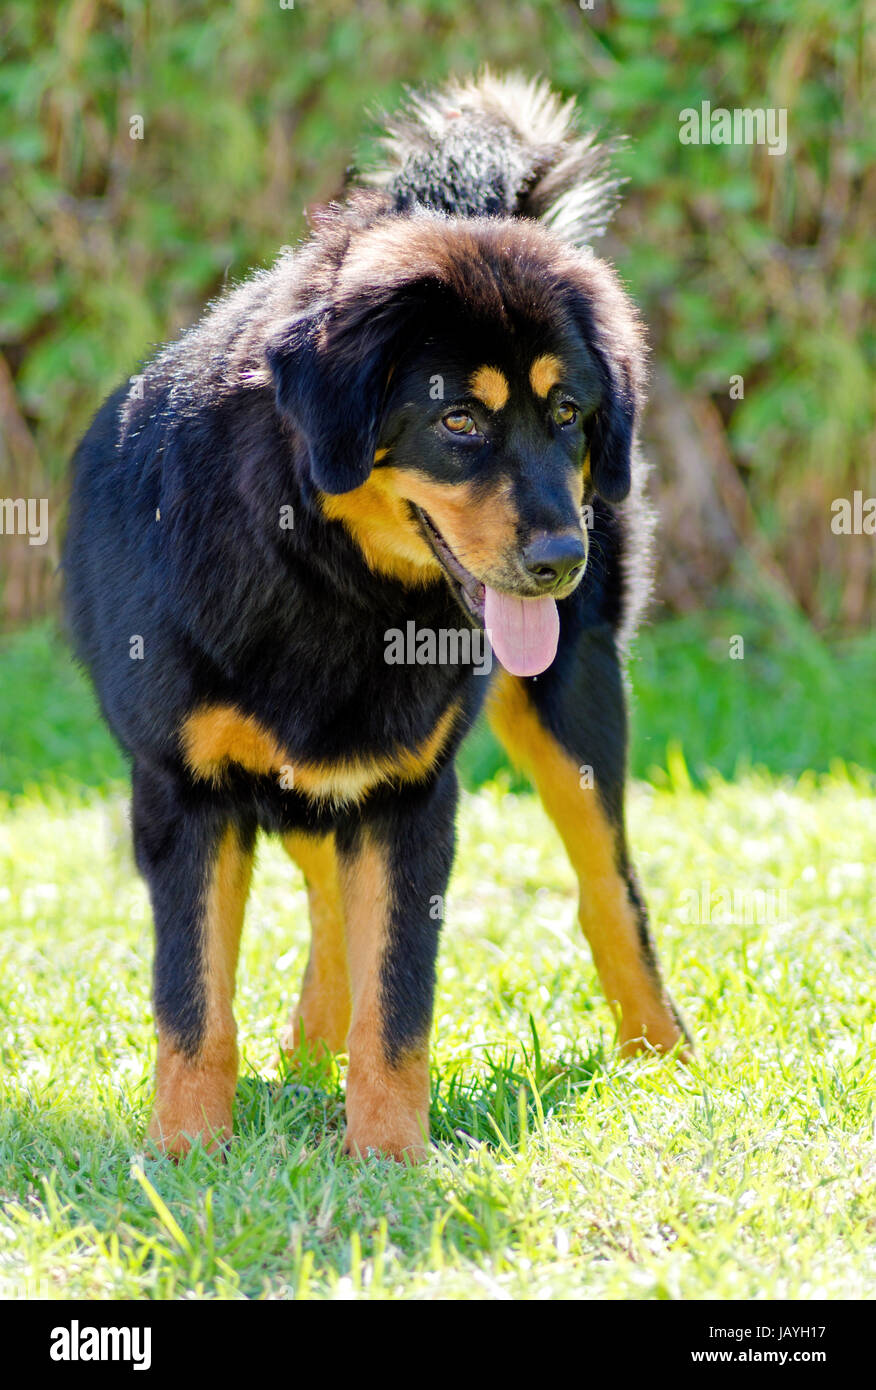 A young, beautiful, black and tan - gold Tibetan Mastiff puppy dog standing on the lawn. Do Khyi dogs are known for being courageous, thoughtful and calm. Stock Photo